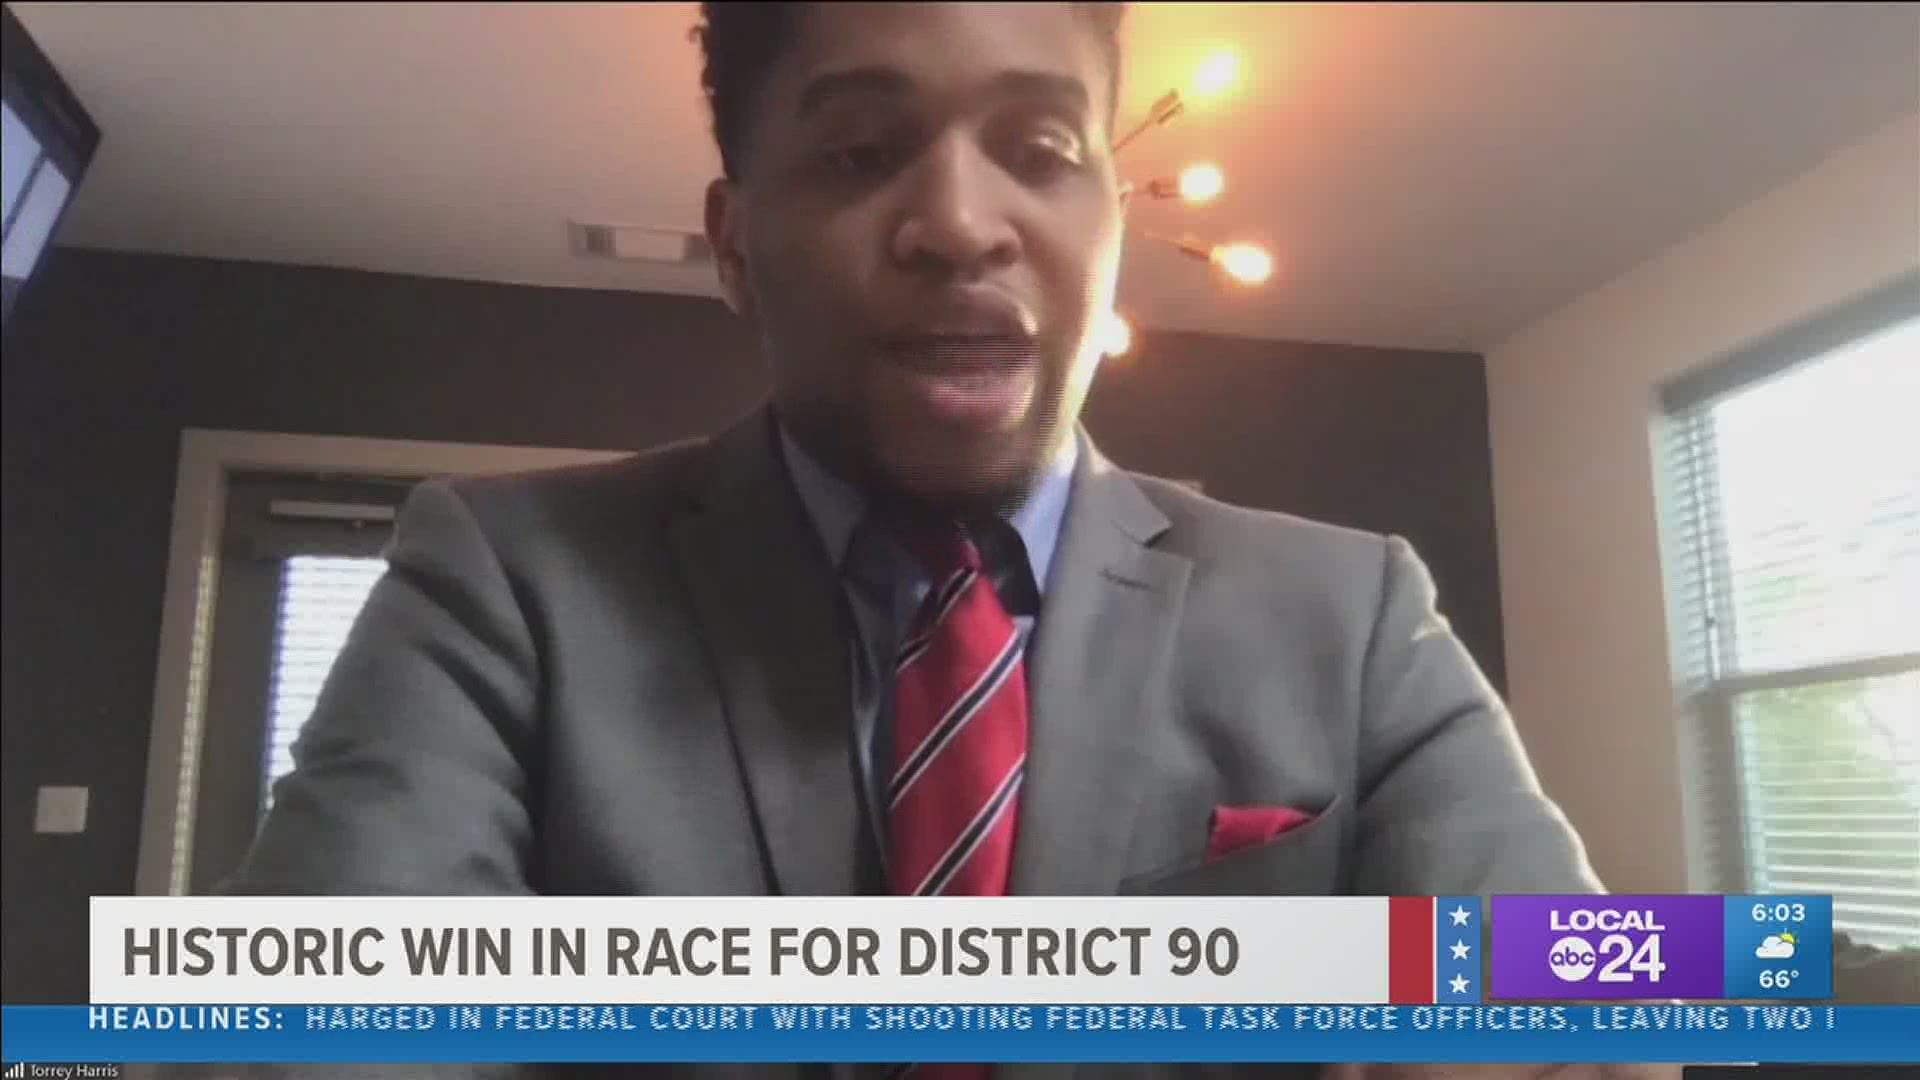 29-year-old will be youngest Tennessee state lawmaker, and one of the two first LGBTQ candidates elected to the state legislature Tuesday night.